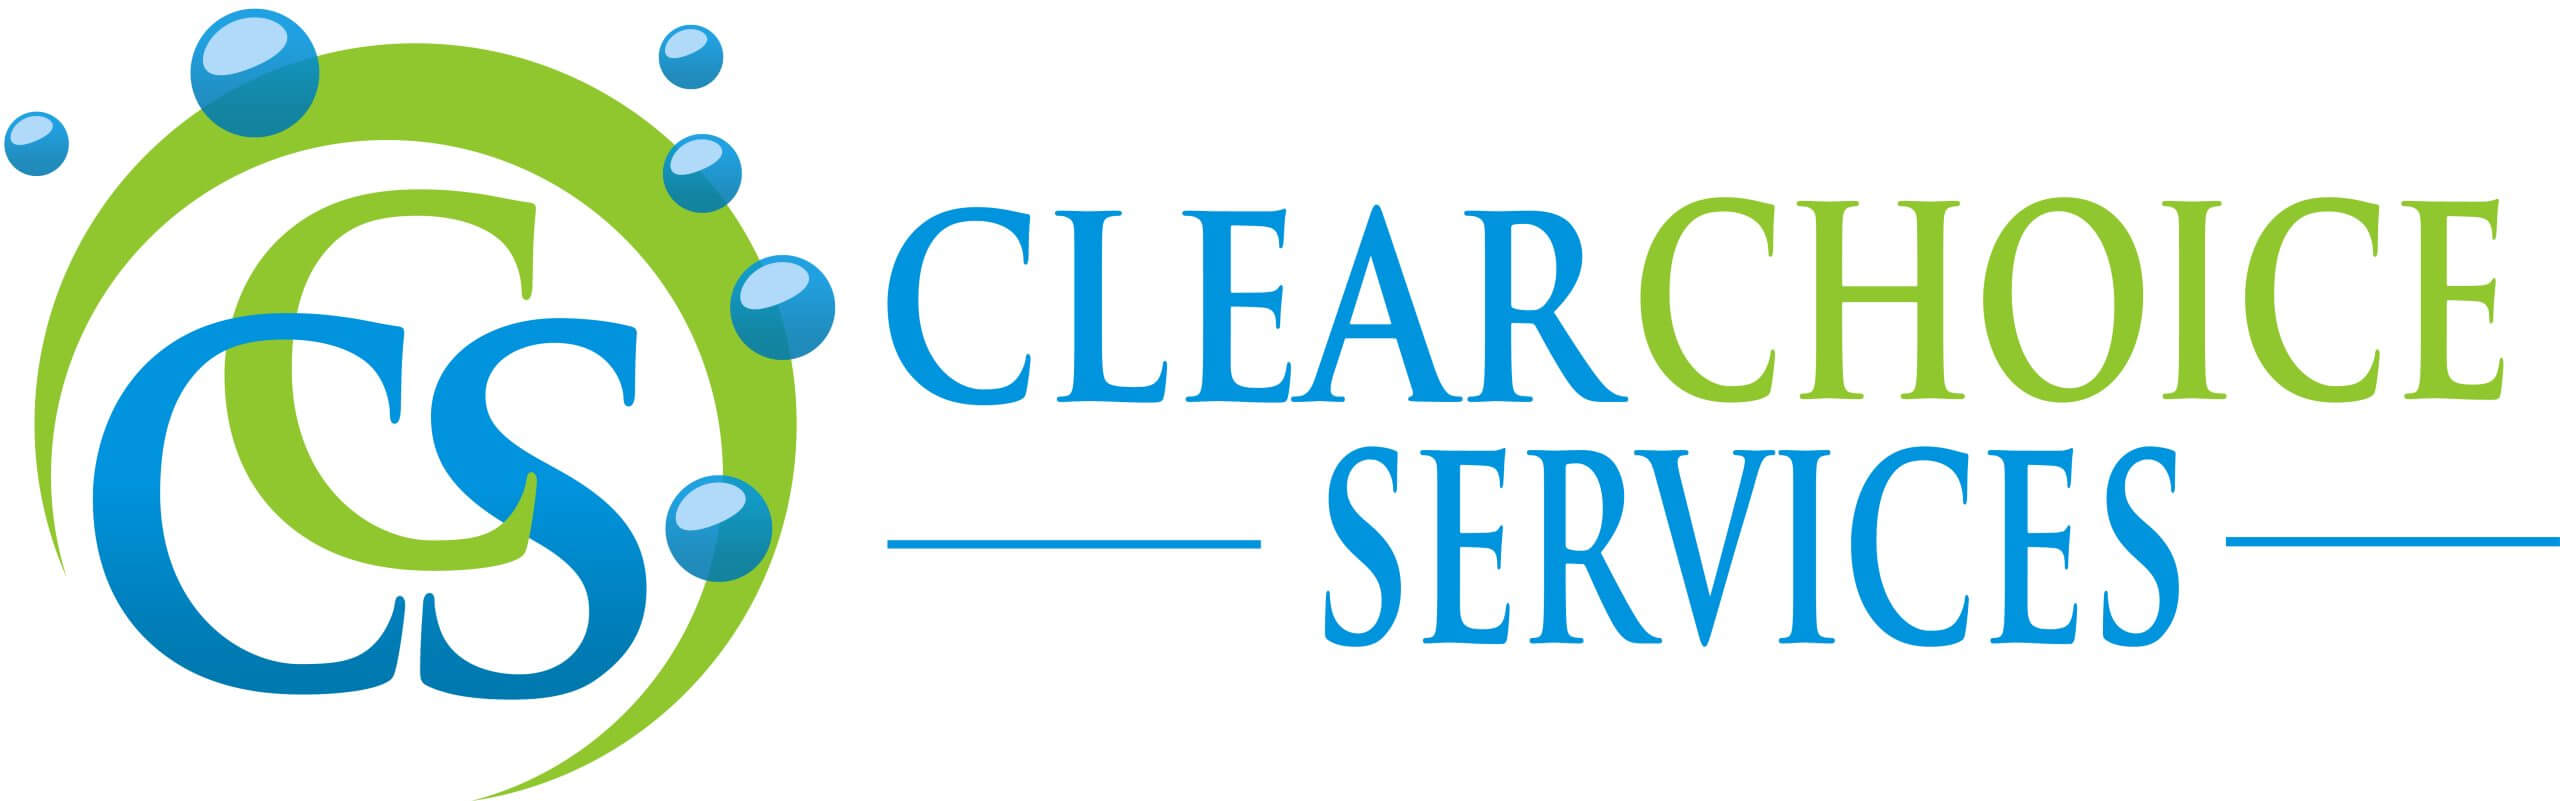 ClearChoice Services Inc.